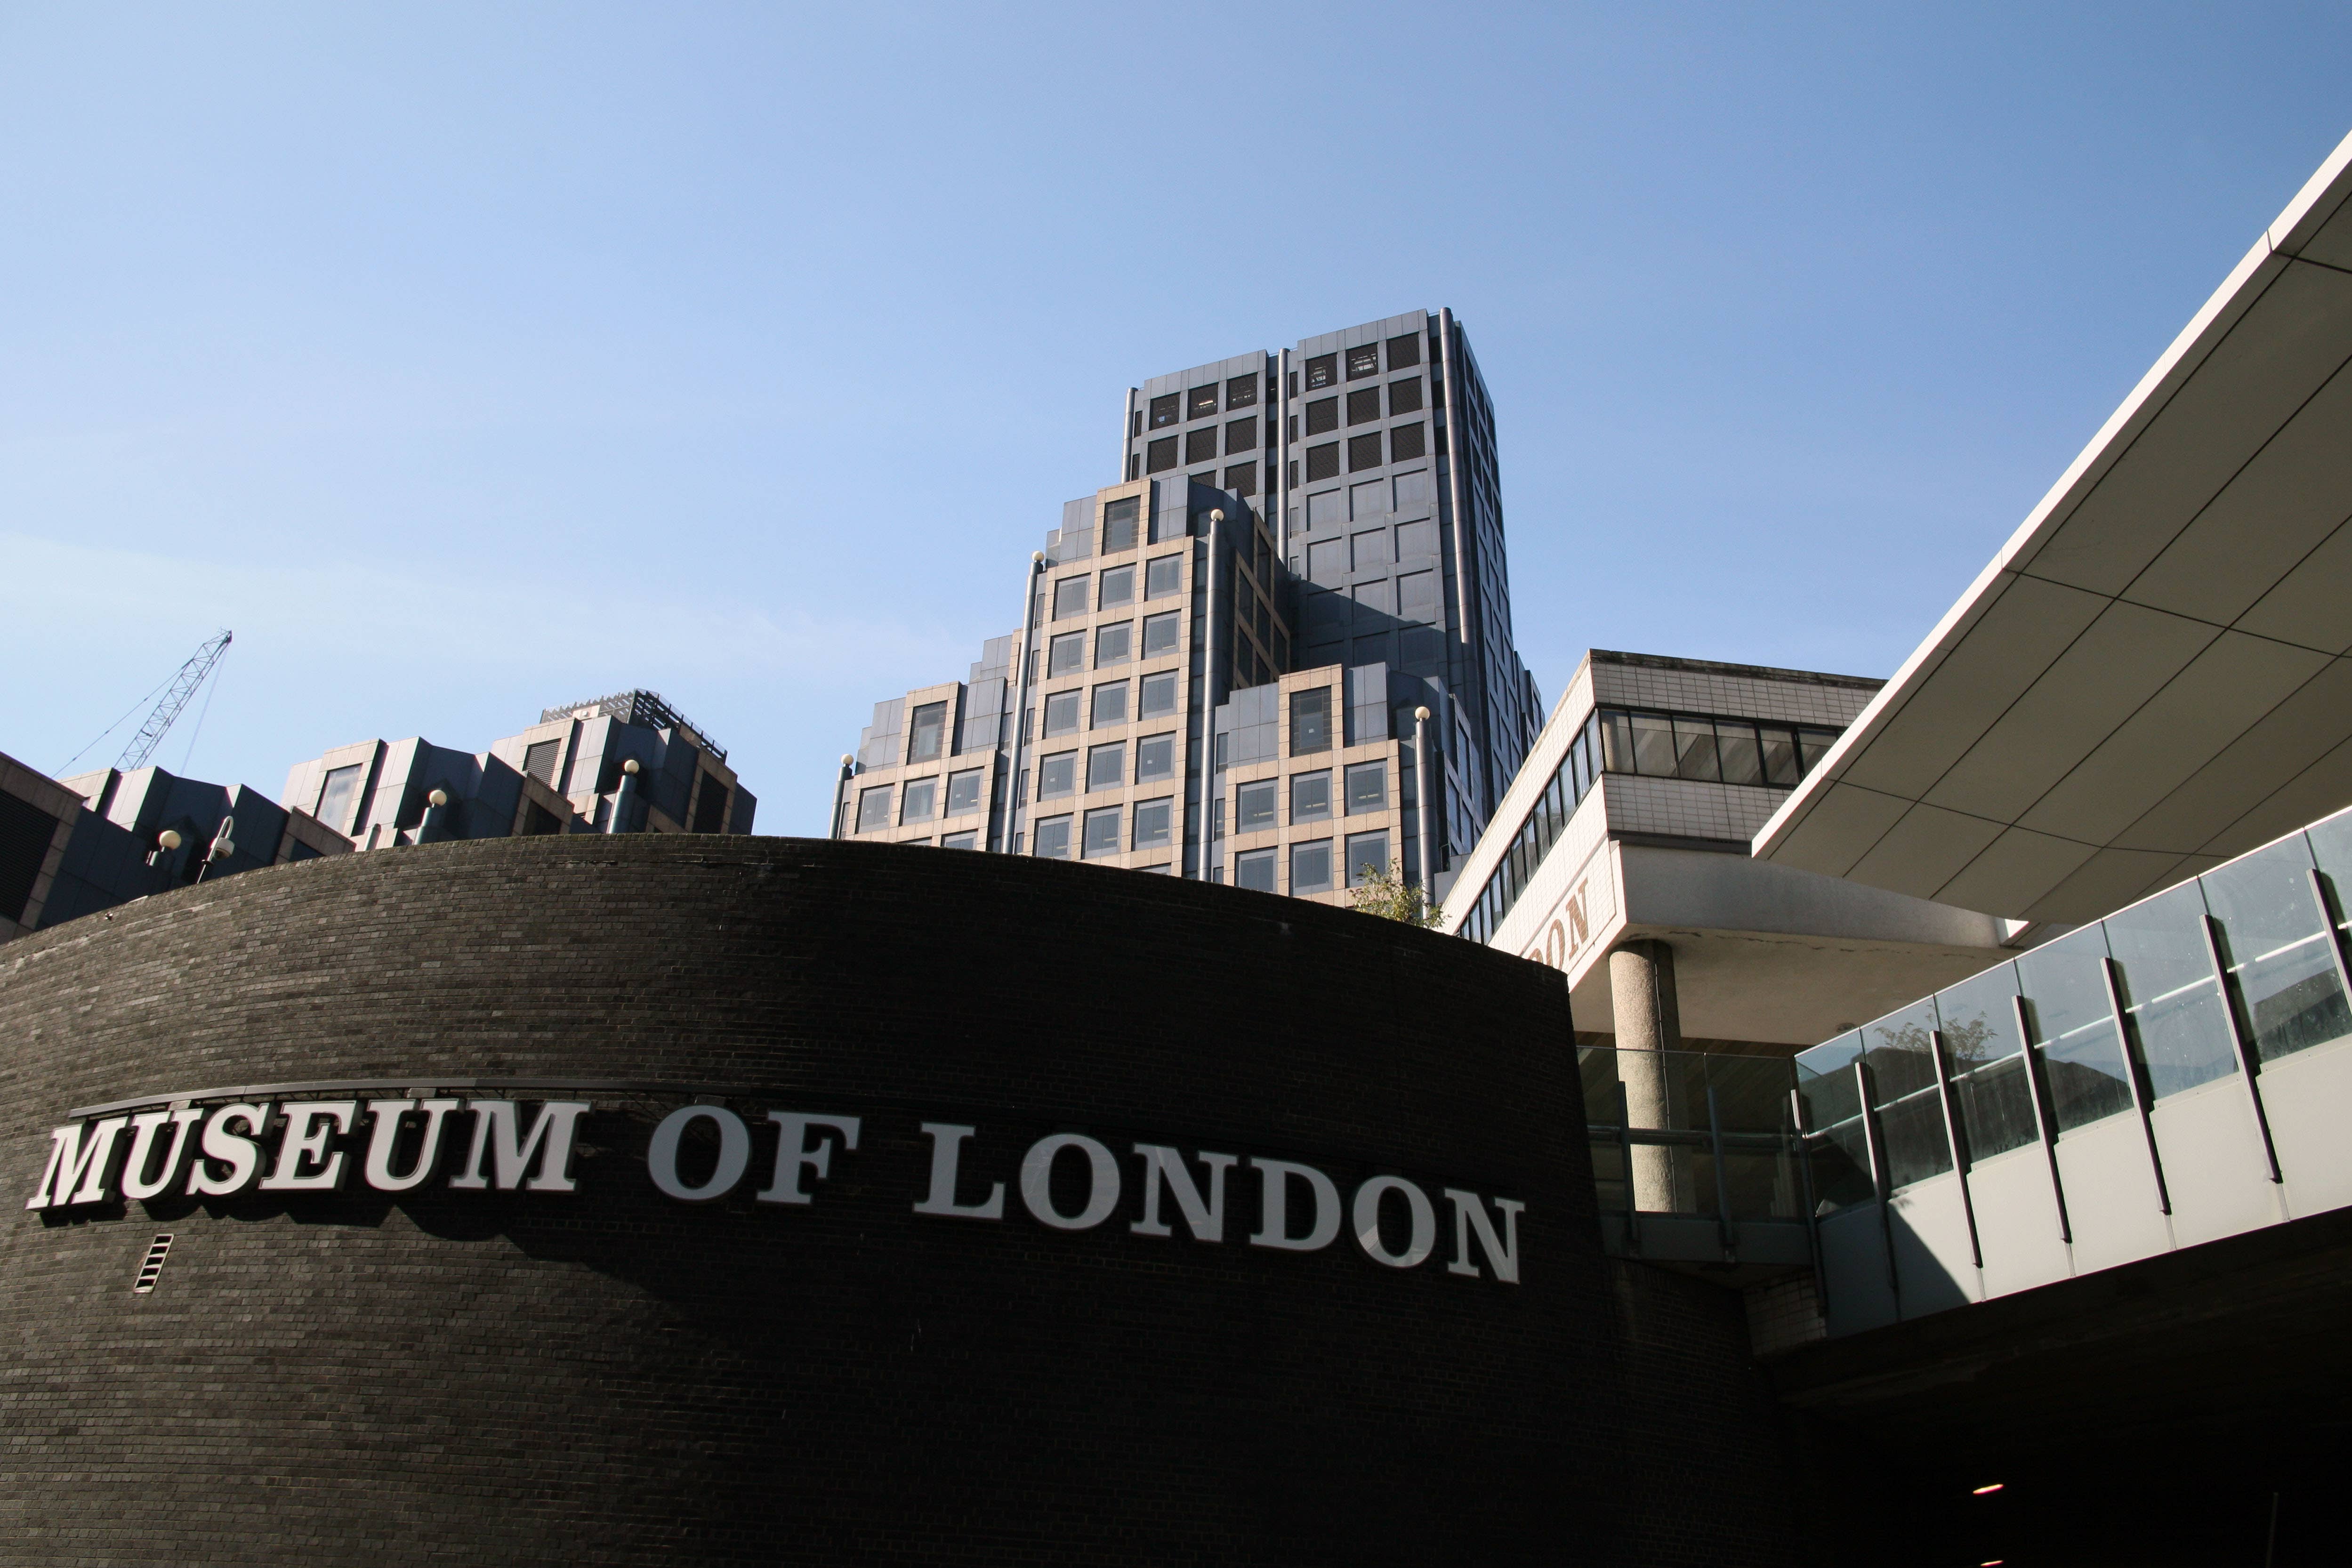 A campaign group has slammed the “misinformed and misleading” data that has been used to justify demolishing two historic buildings in London’s Barbican (Alamy/PA)